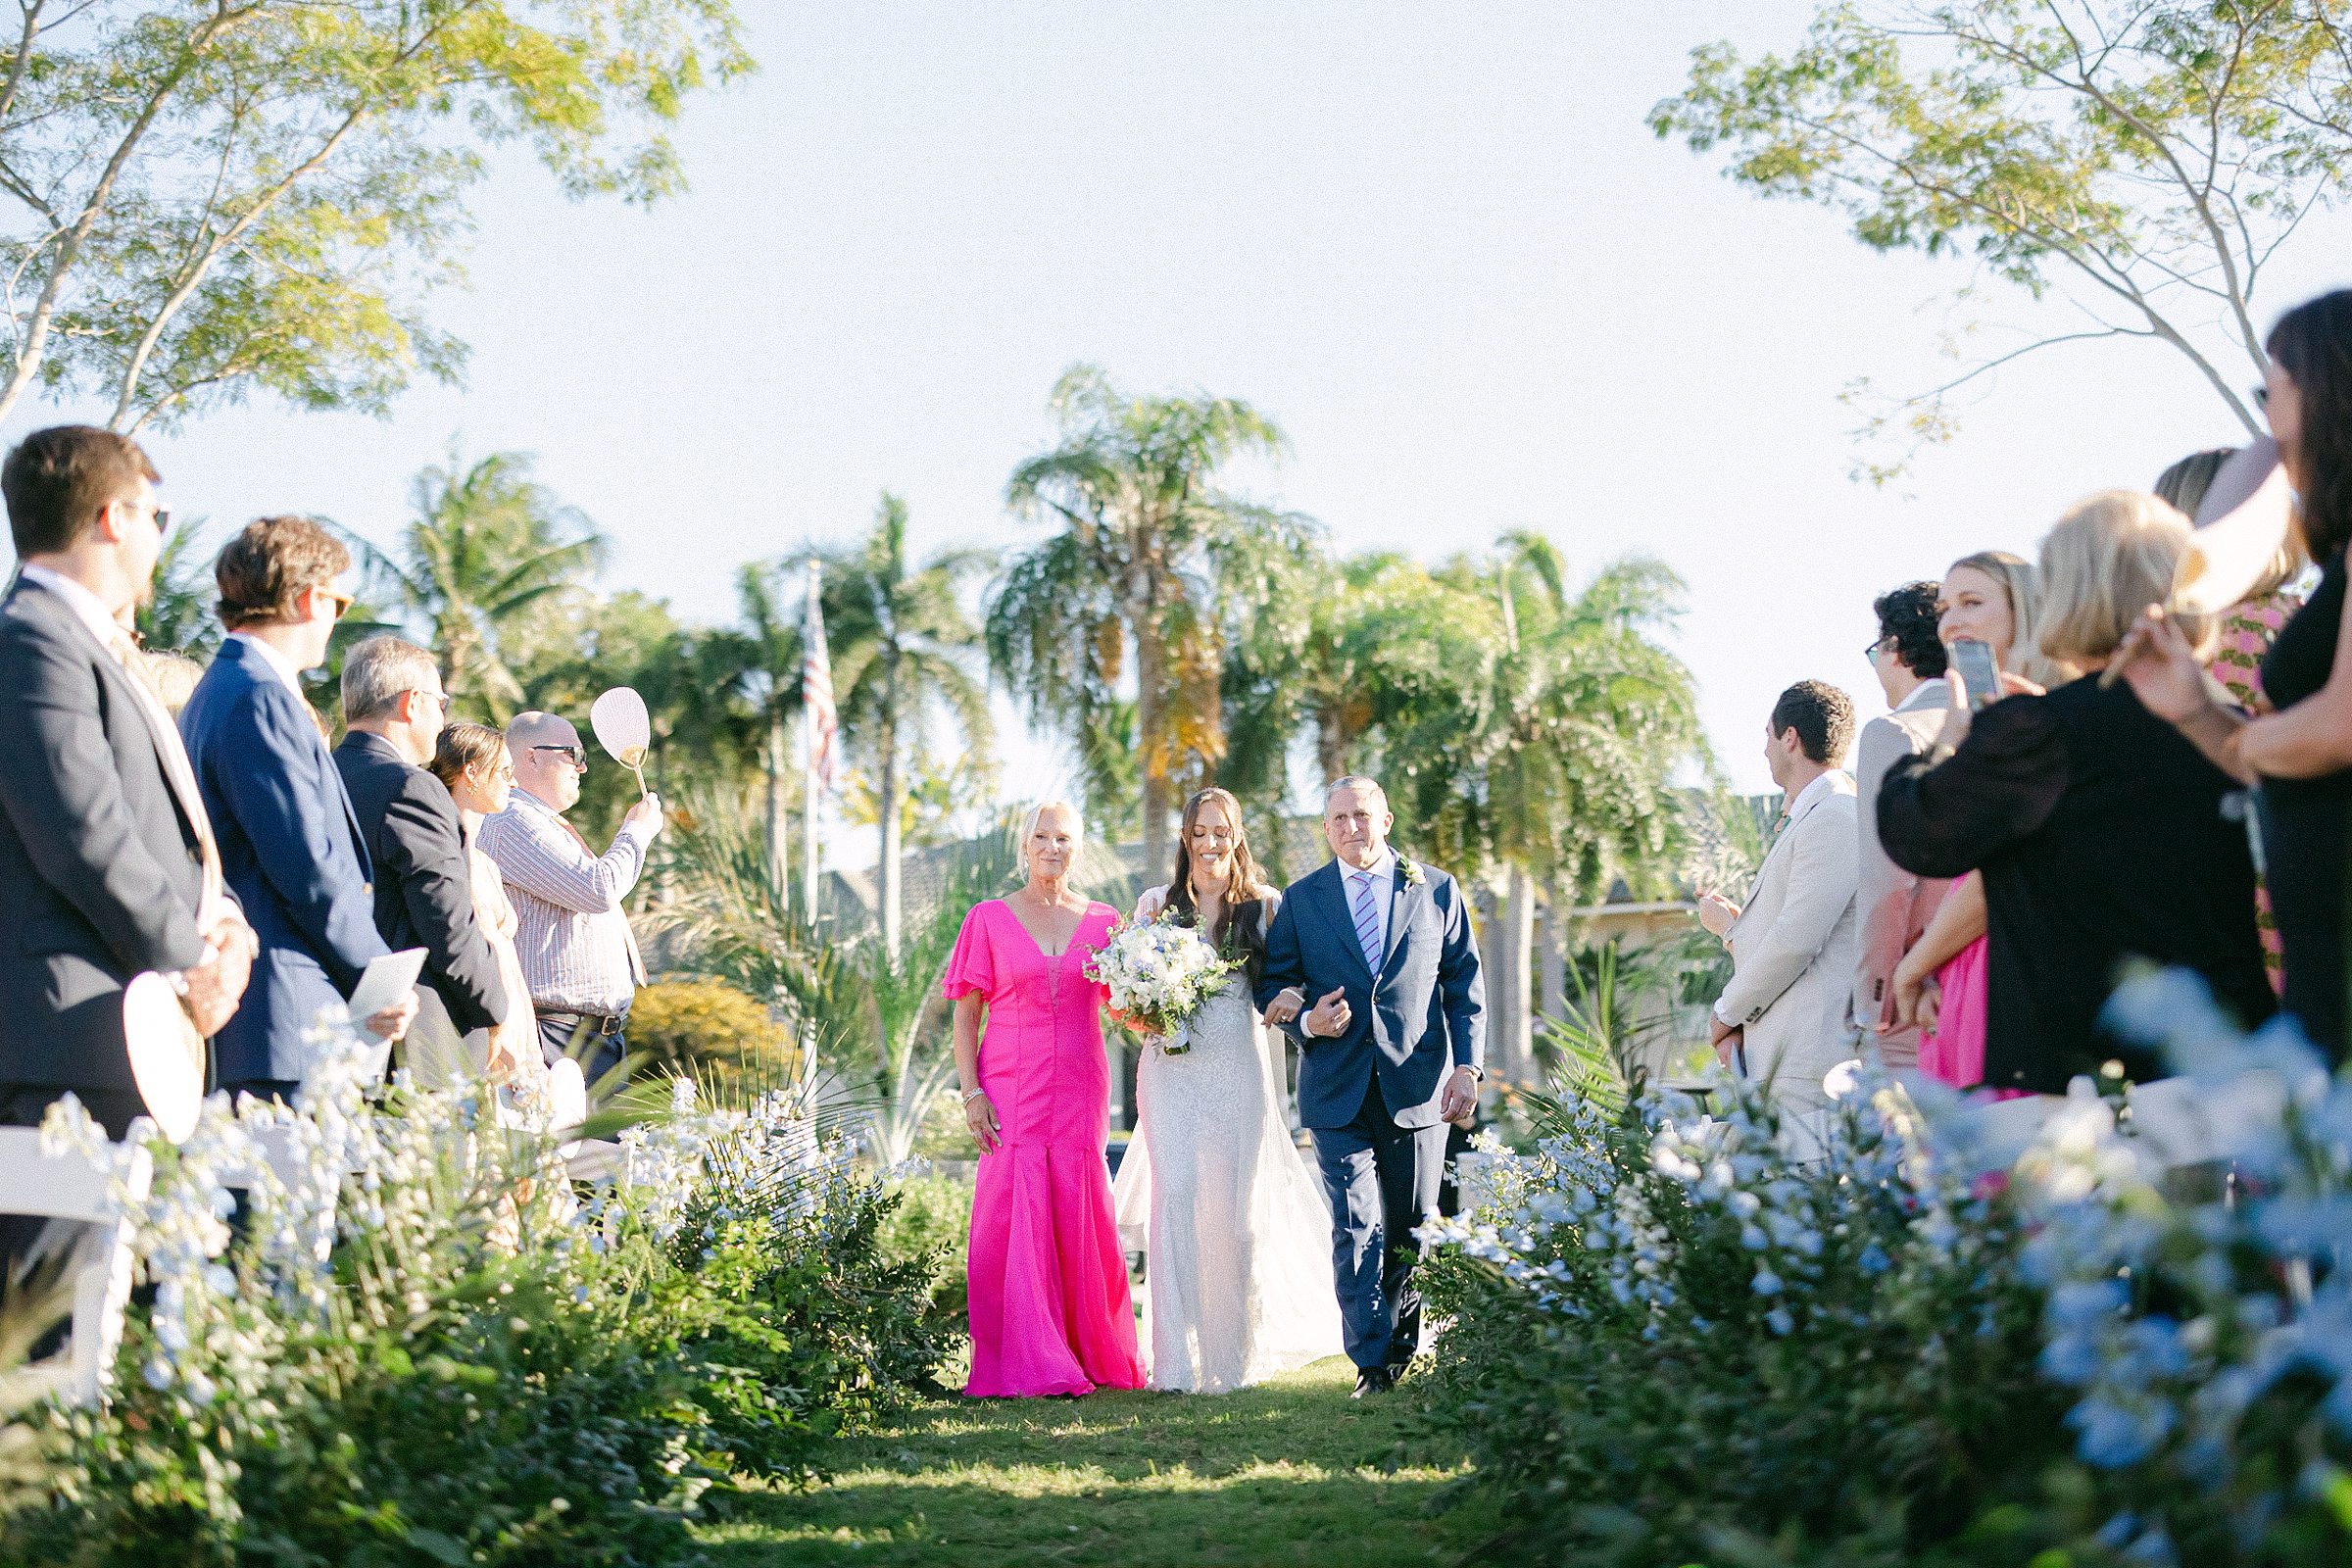 the bride walking down the aisle escorted by her father in a blue suite and mother in a pink dress